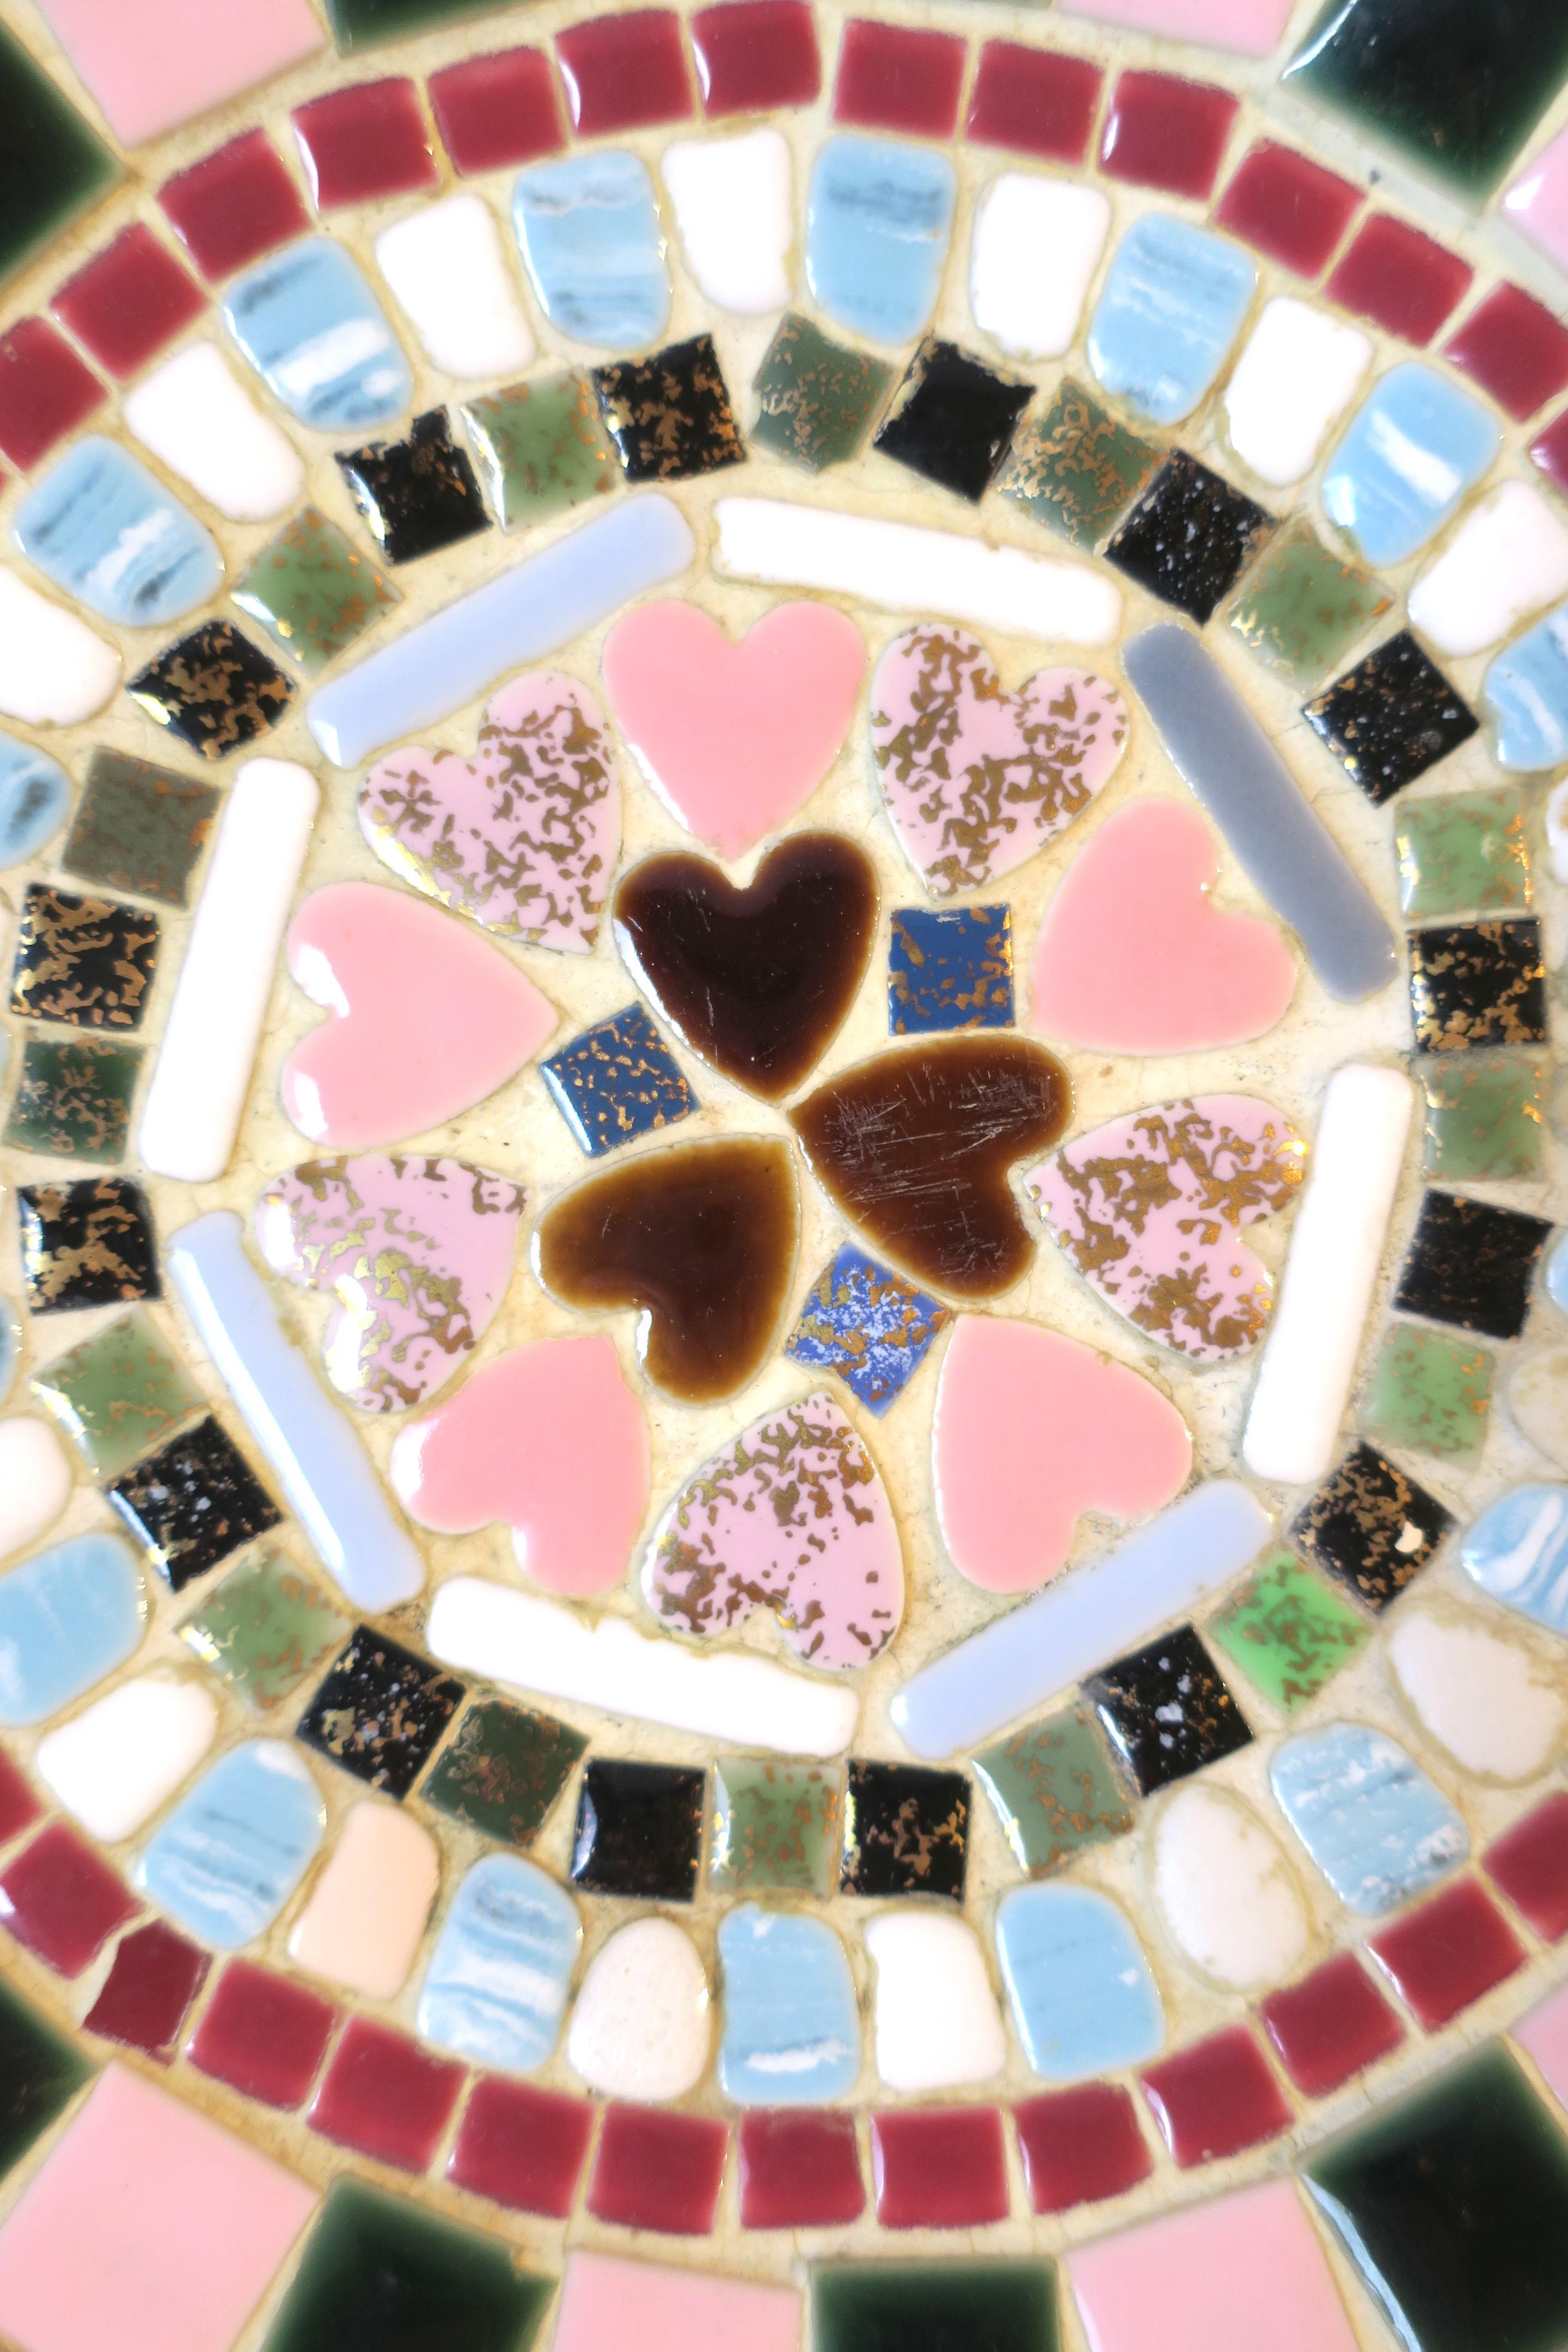 Ceramic Tile Mosaic Dish Vide-Poche with Pink Hearts, circa Mid-20th Century For Sale 2